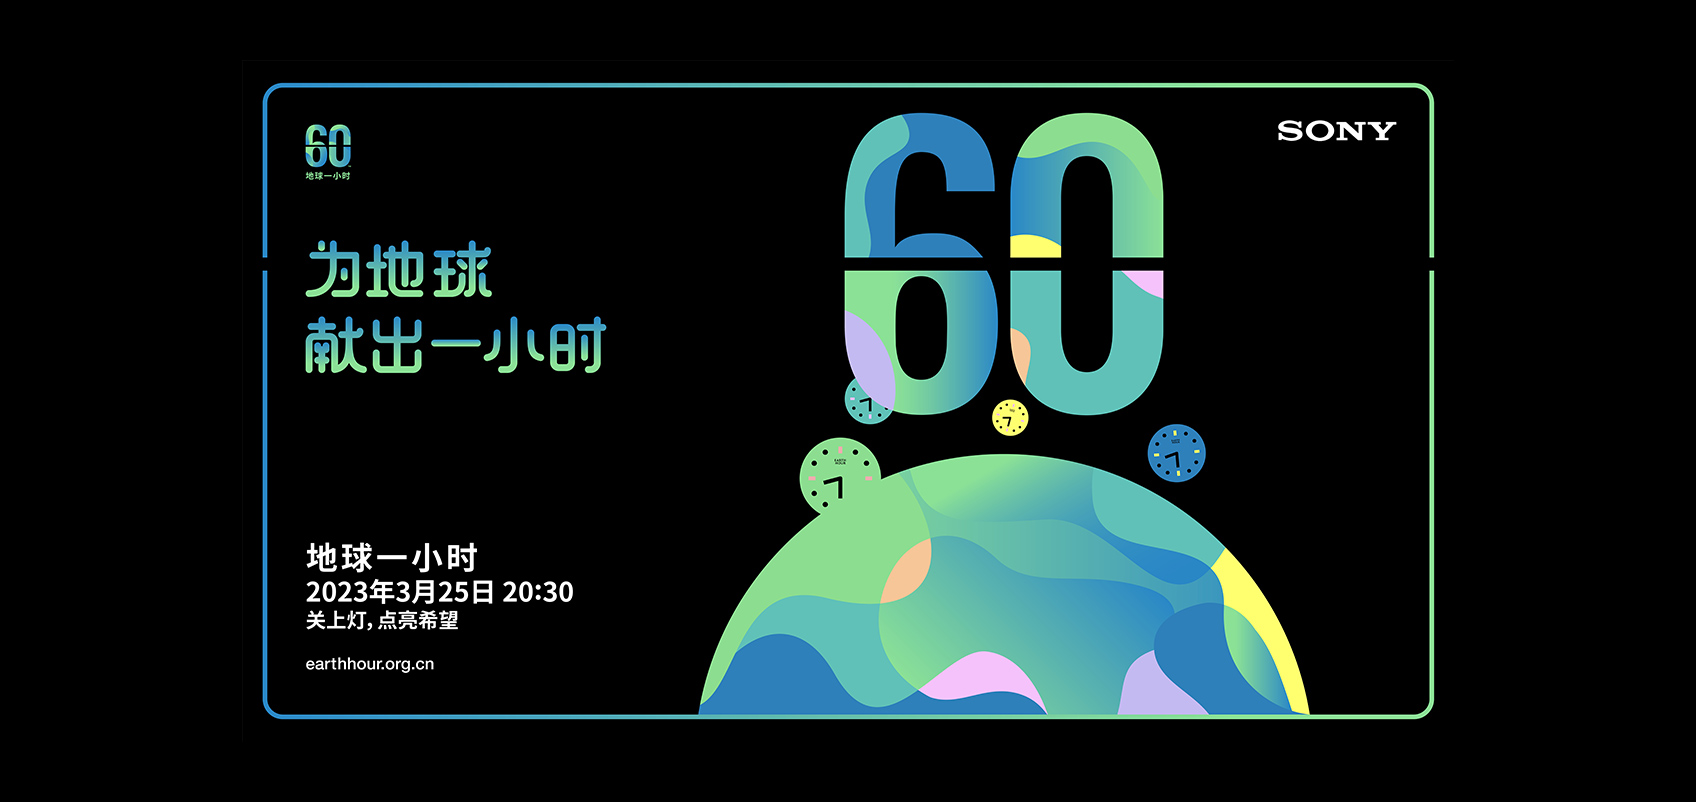 Poster in Chinese with the number "60" and a large image of the earth